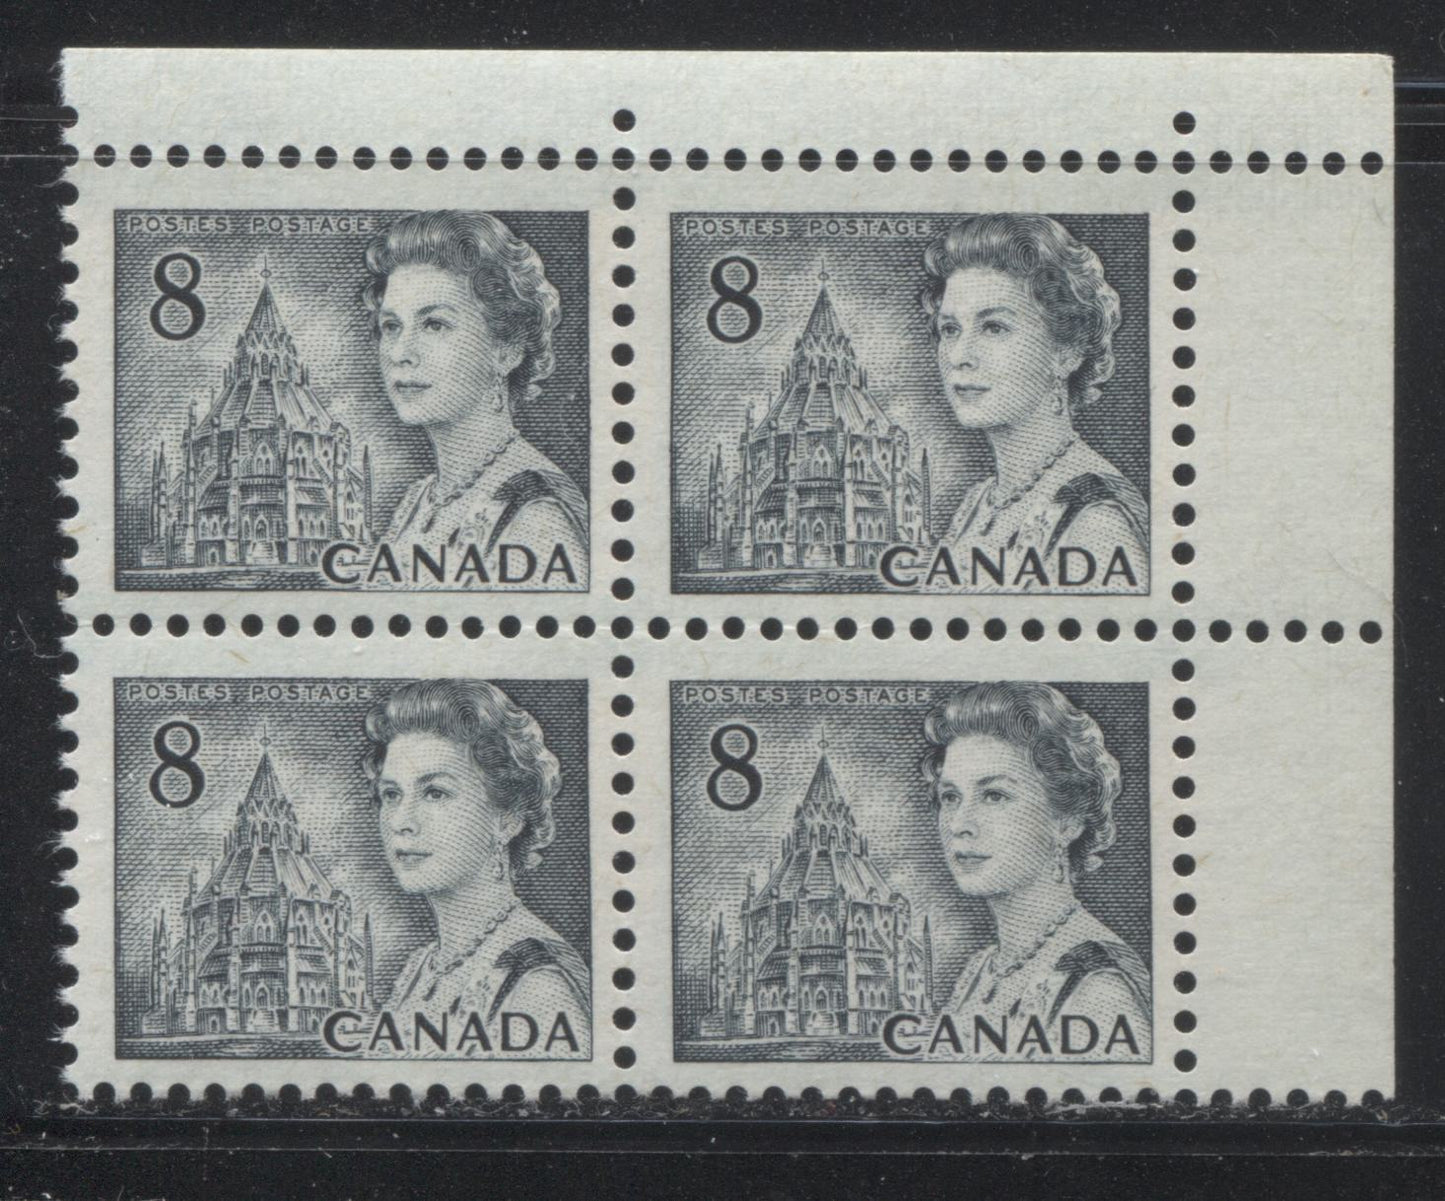 Lot 175 Canada #544iiver 8c Slate Queen Elizabeth II, 1967-1973 Centennial Issue, An Unlisted FNH UR Field Stock Block Of 4 On MF-fl Ribbed Paper With PVA Gum